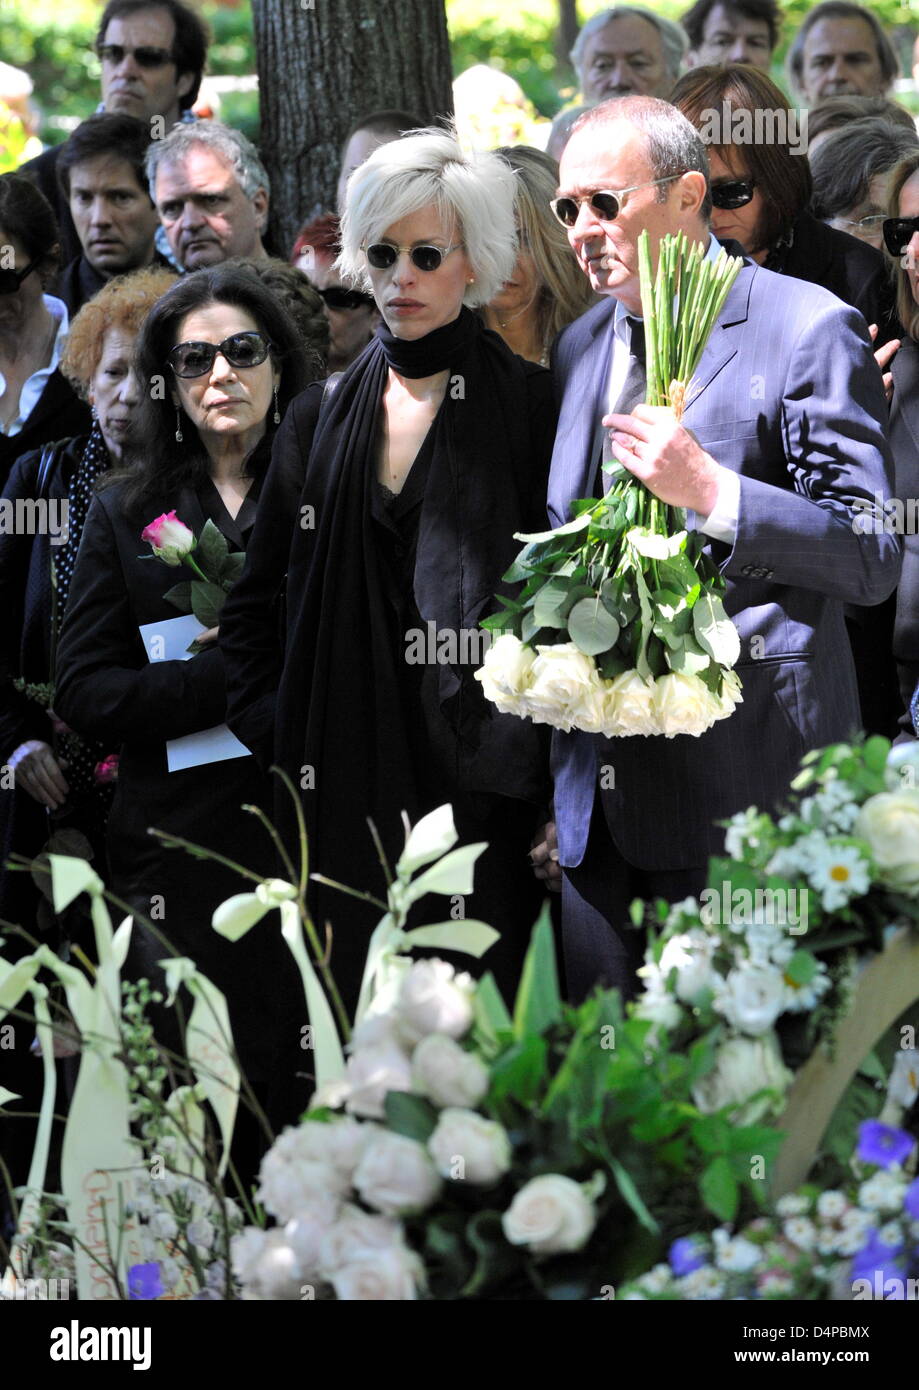 Actress Hannelore Elsner (L), director Bernd Eichinger and his wife Katja (C) stand in front of the grave during the funeral of actress Barbara Rudnik in Munich, Germany, 29 May 2009. Rudnik passed away aged 50 on 23 May 2009 after a long struggle against cancer. Photo: Ursula Dueren Stock Photo